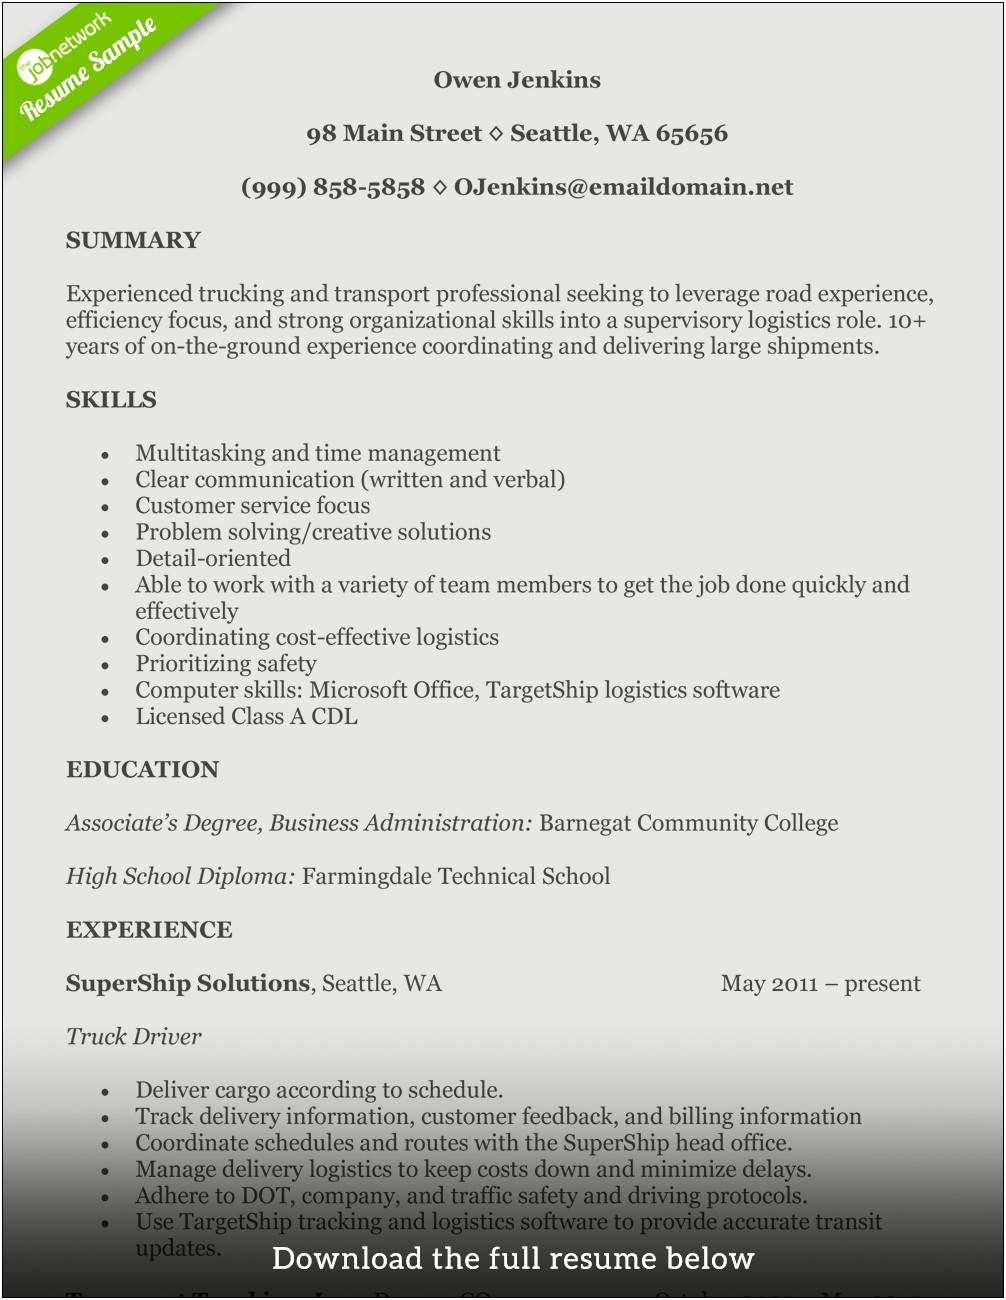 Skills For Bus Driver Resume